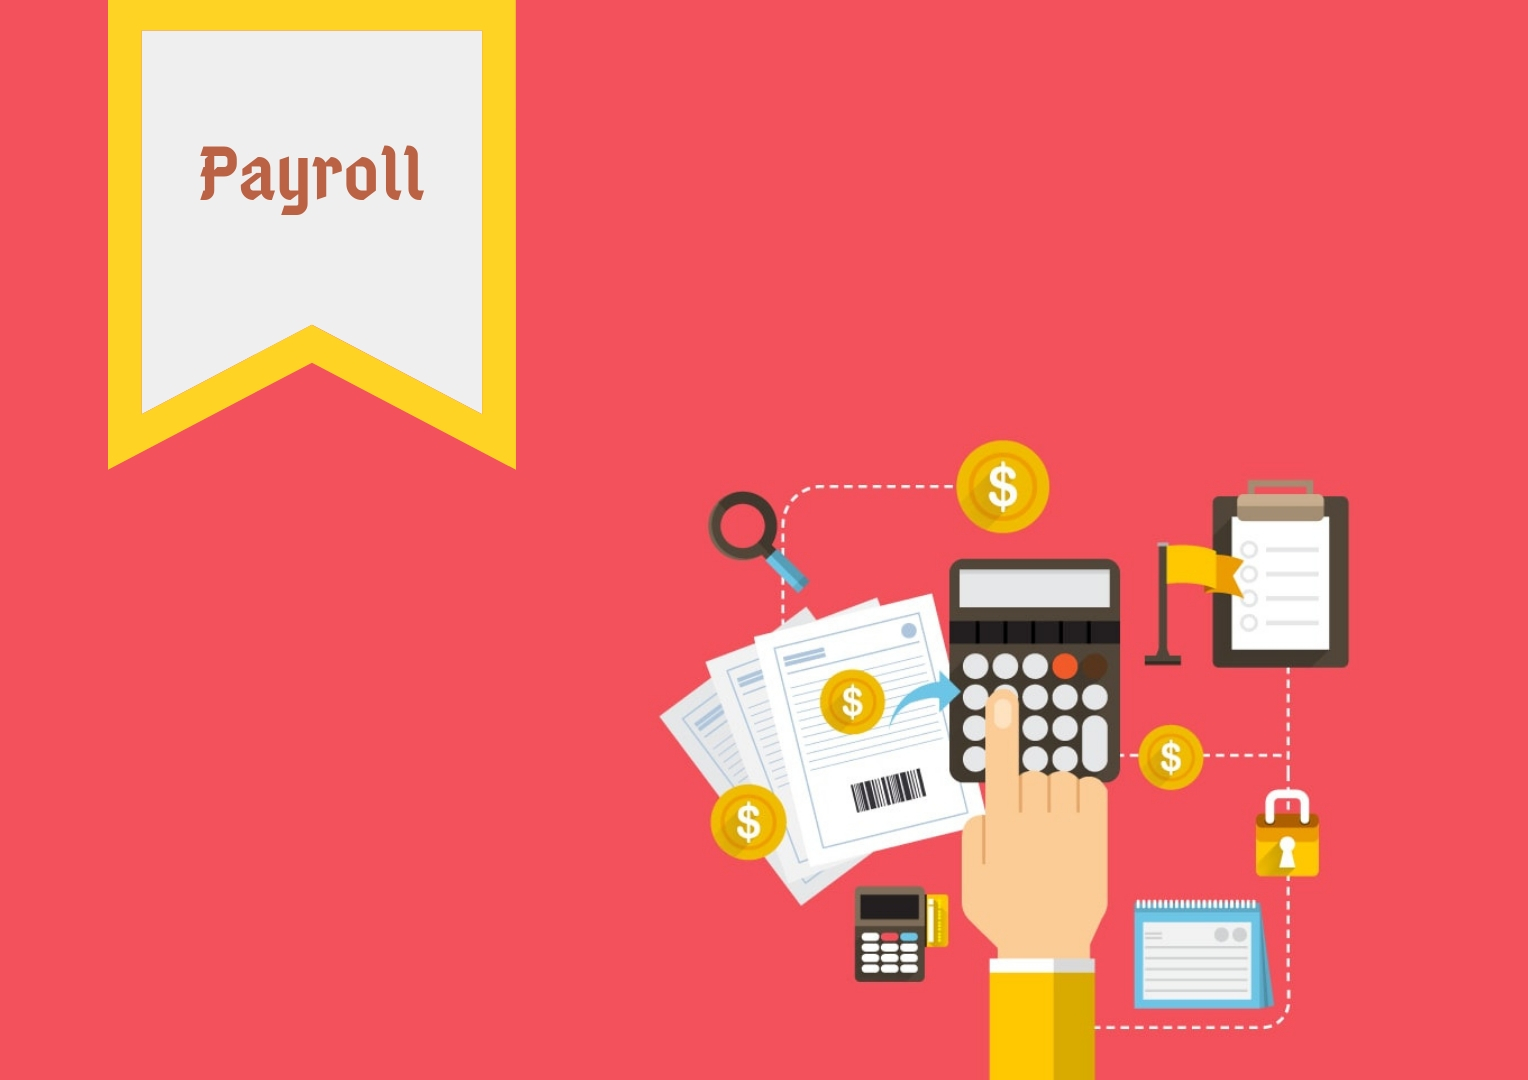 Select payroll software that simplifies complex HR